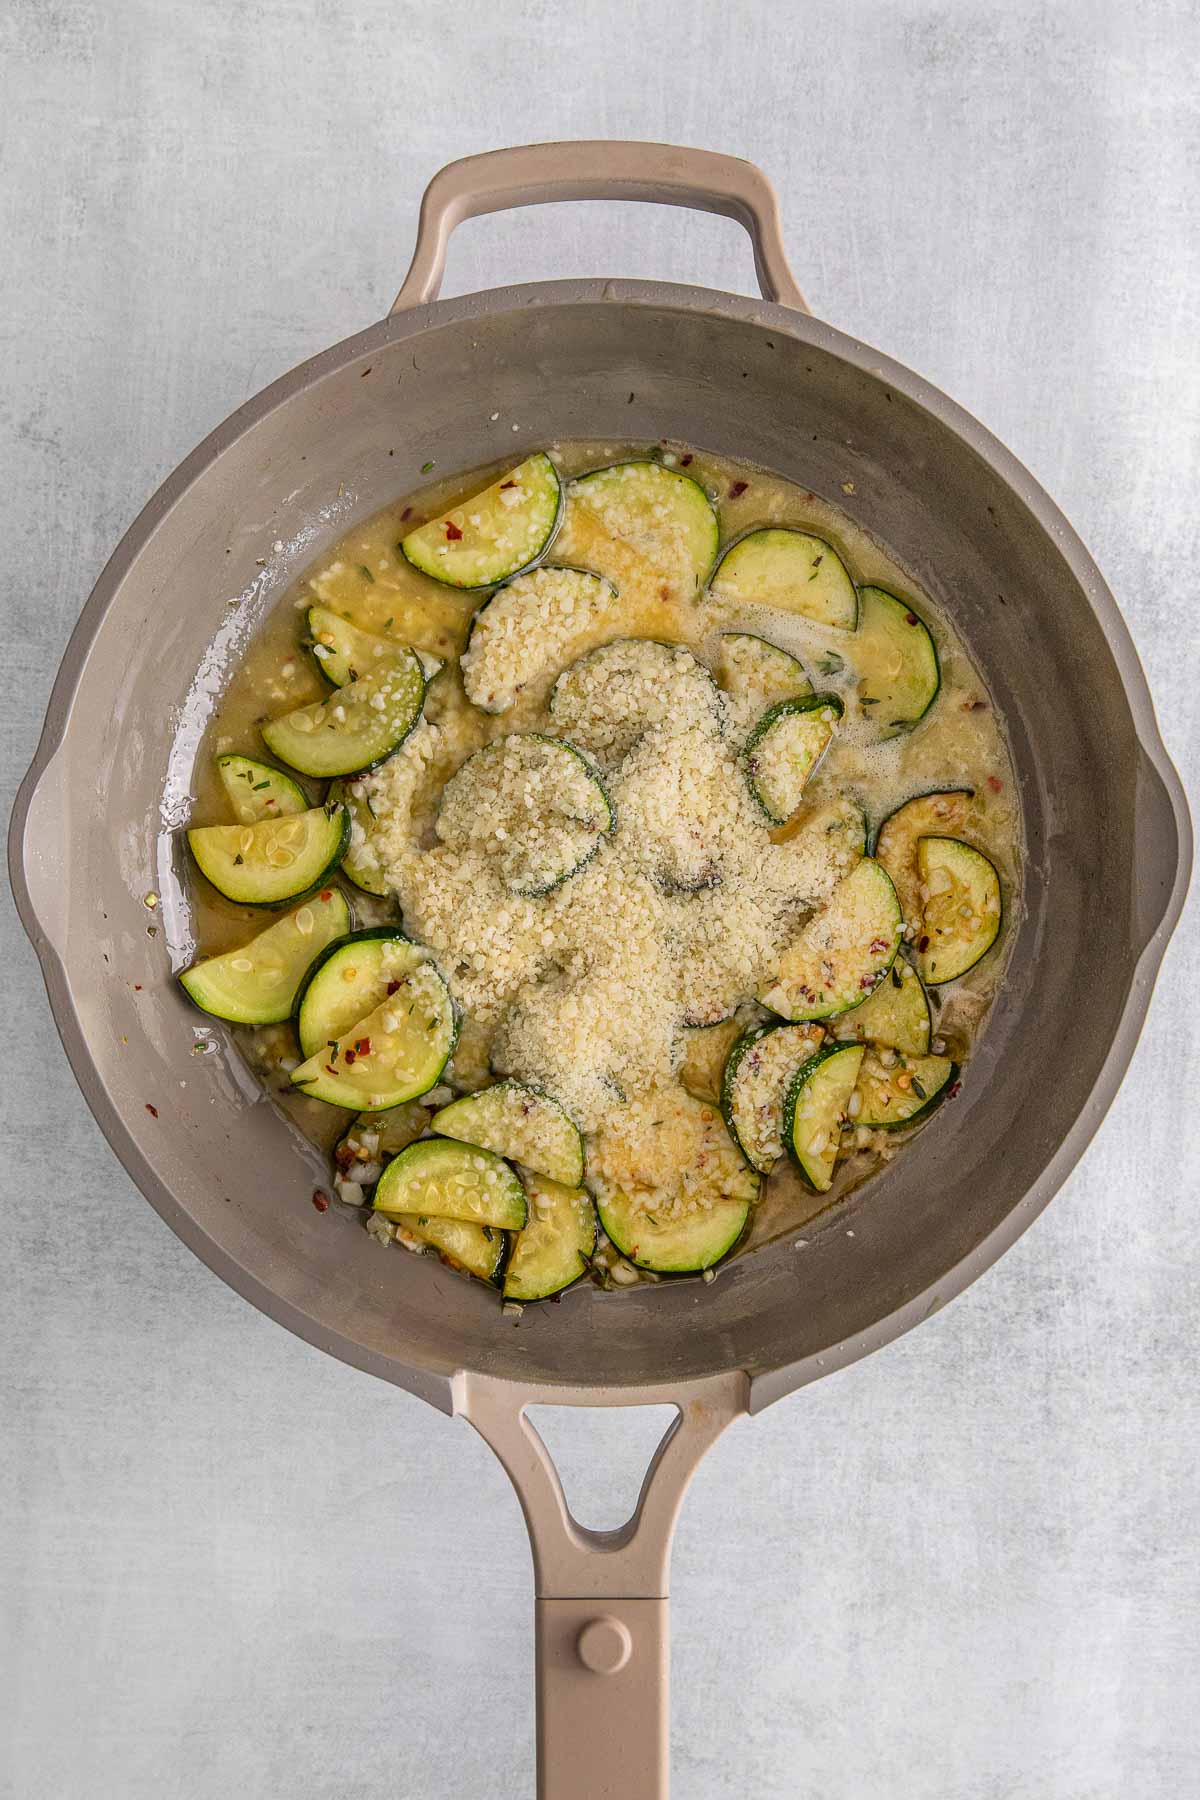 Ingredients added to zucchini in cooking pan.